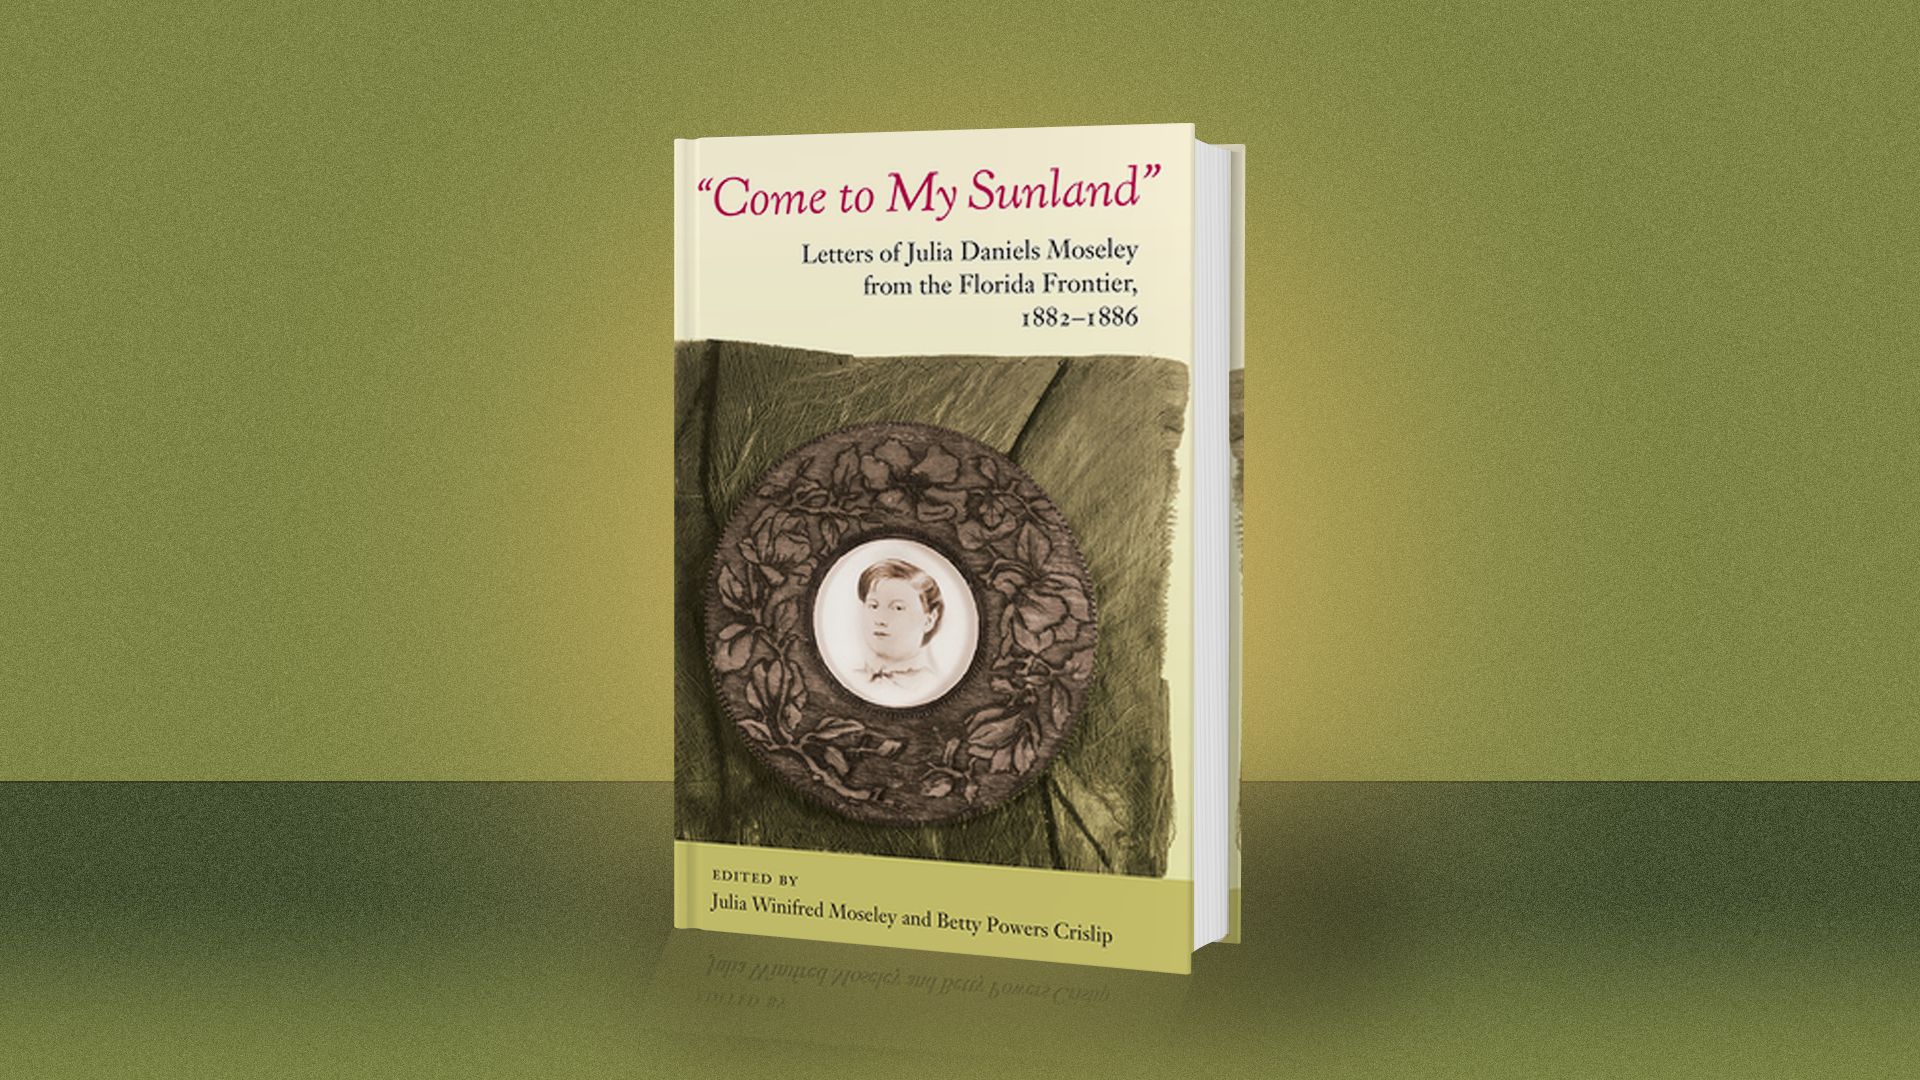 “Come to My Sunland: Letters of Julia Daniels Moseley from the Florida Frontier, 1882-1886” by Julia Winifred Moseley